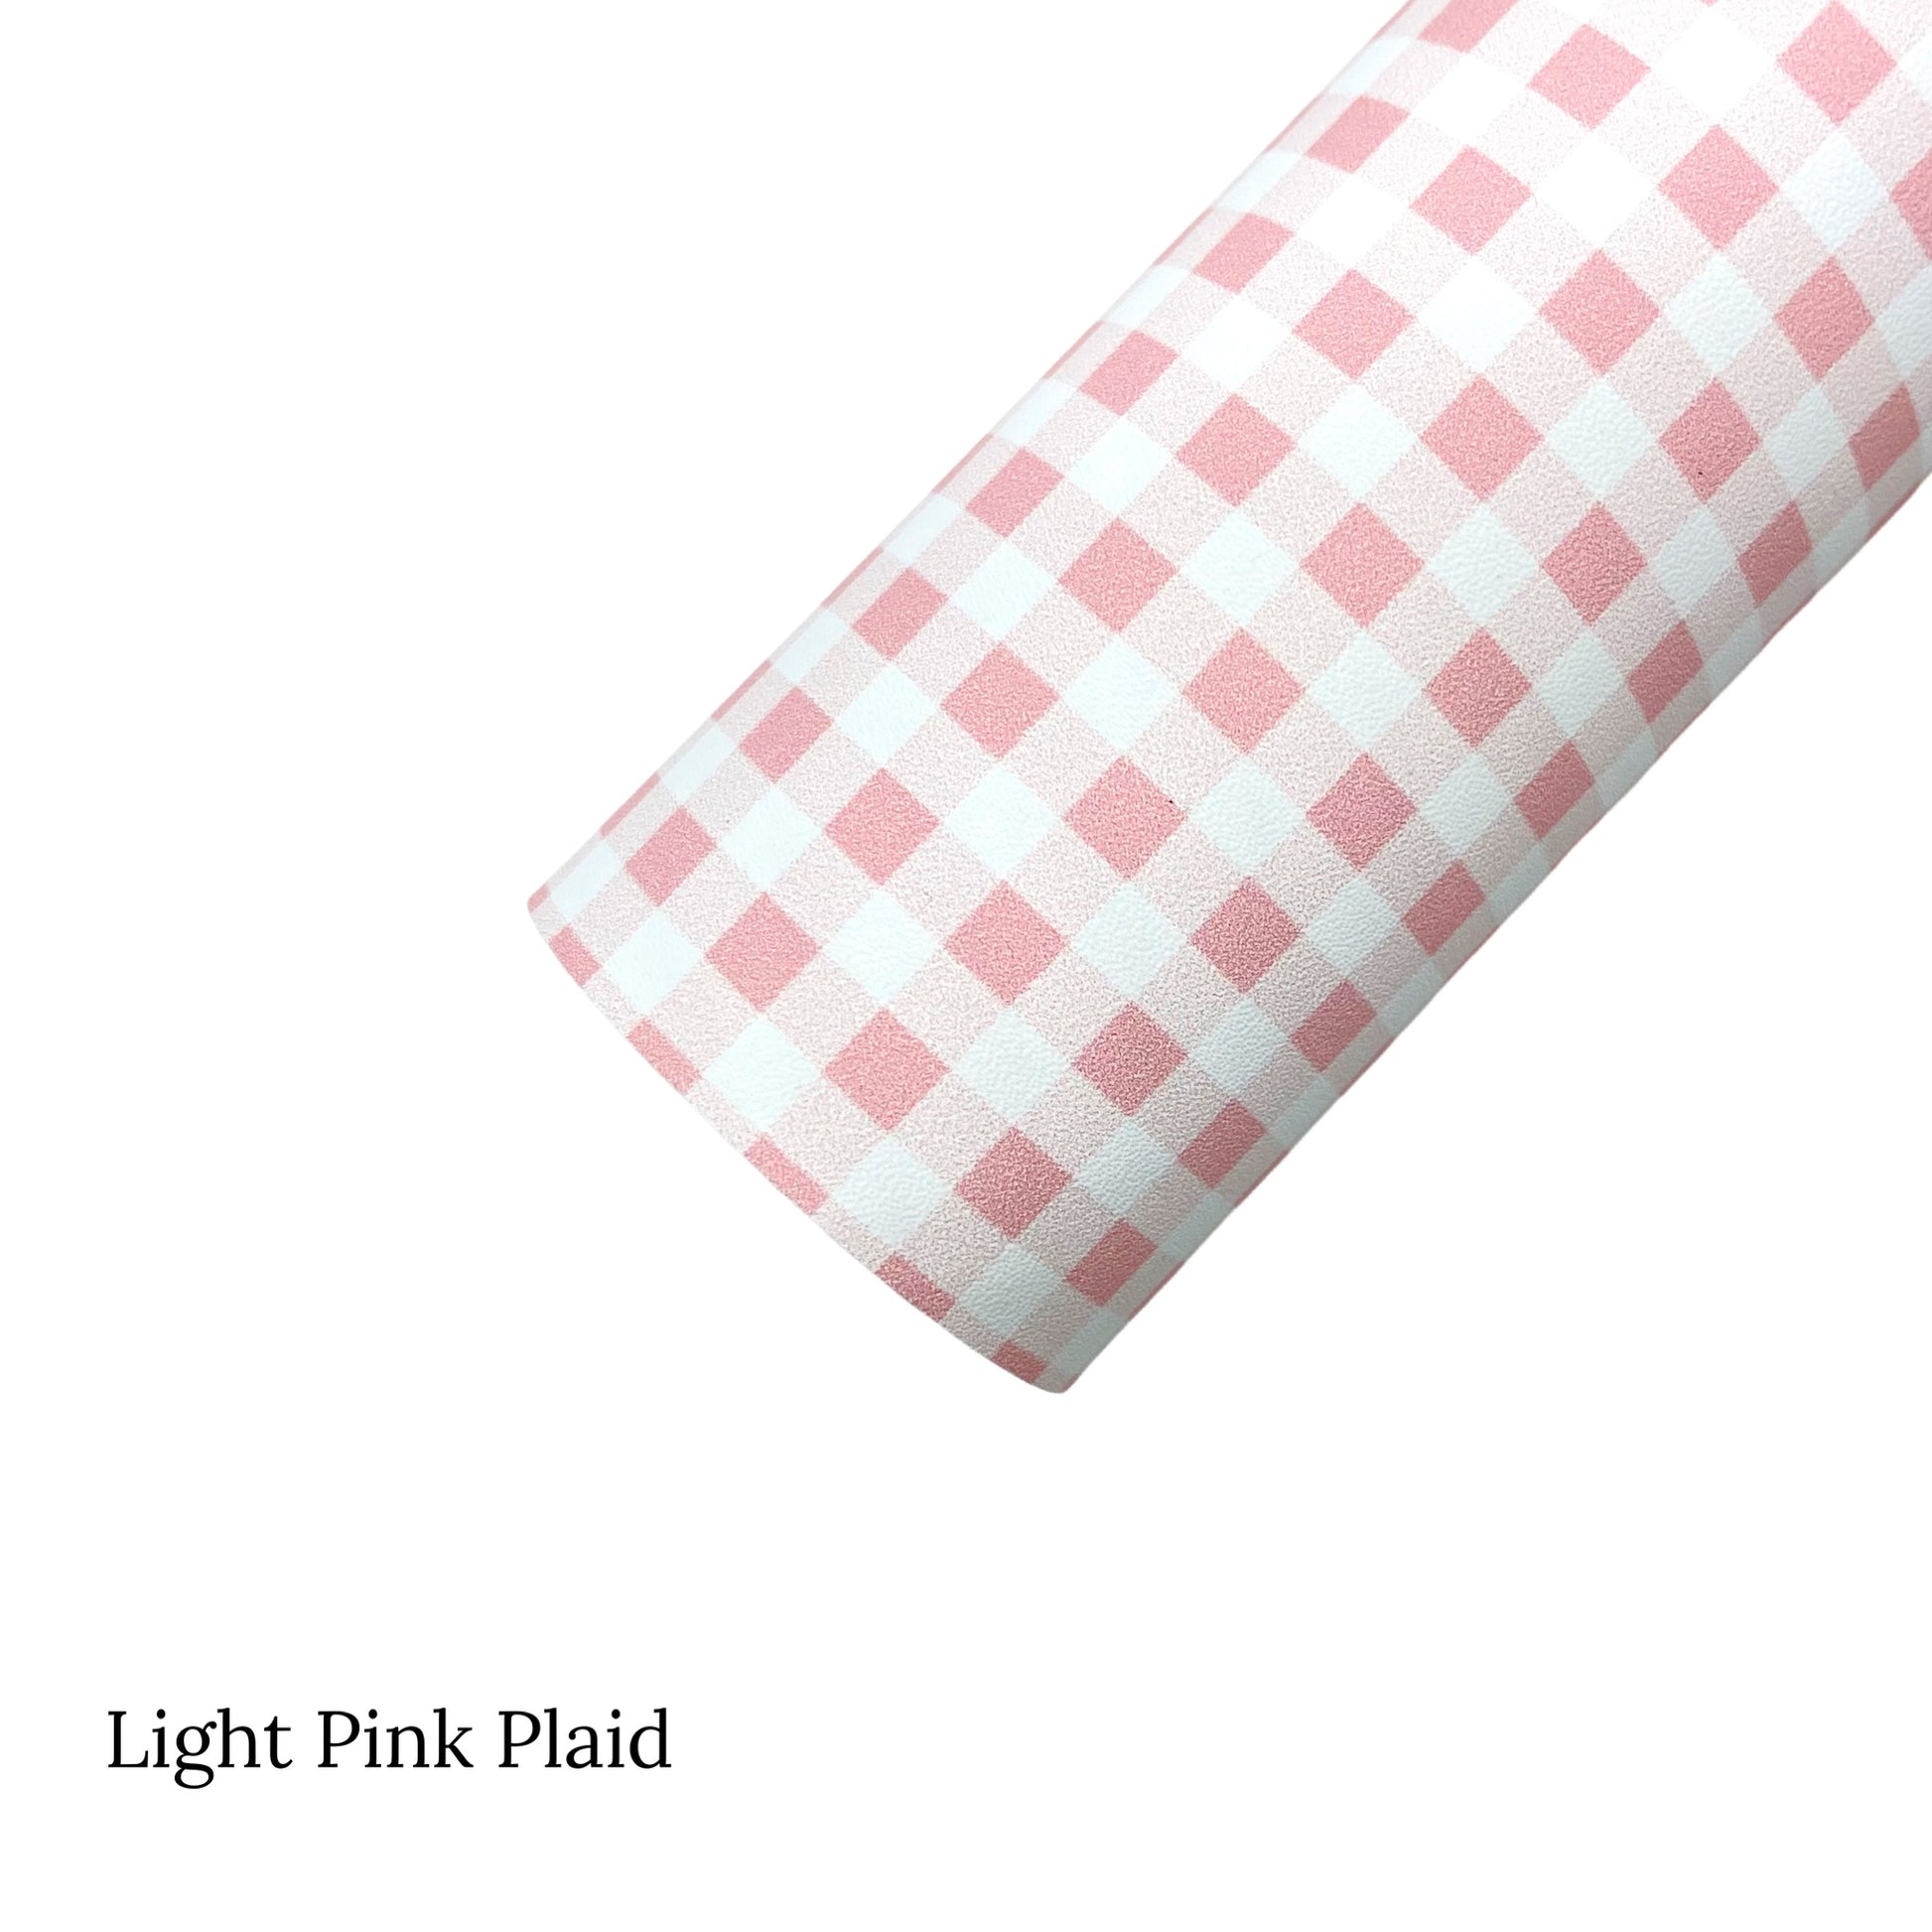 Spring meadow pattern faux leather sheets. Light pink plaid pattern faux leather sheet.